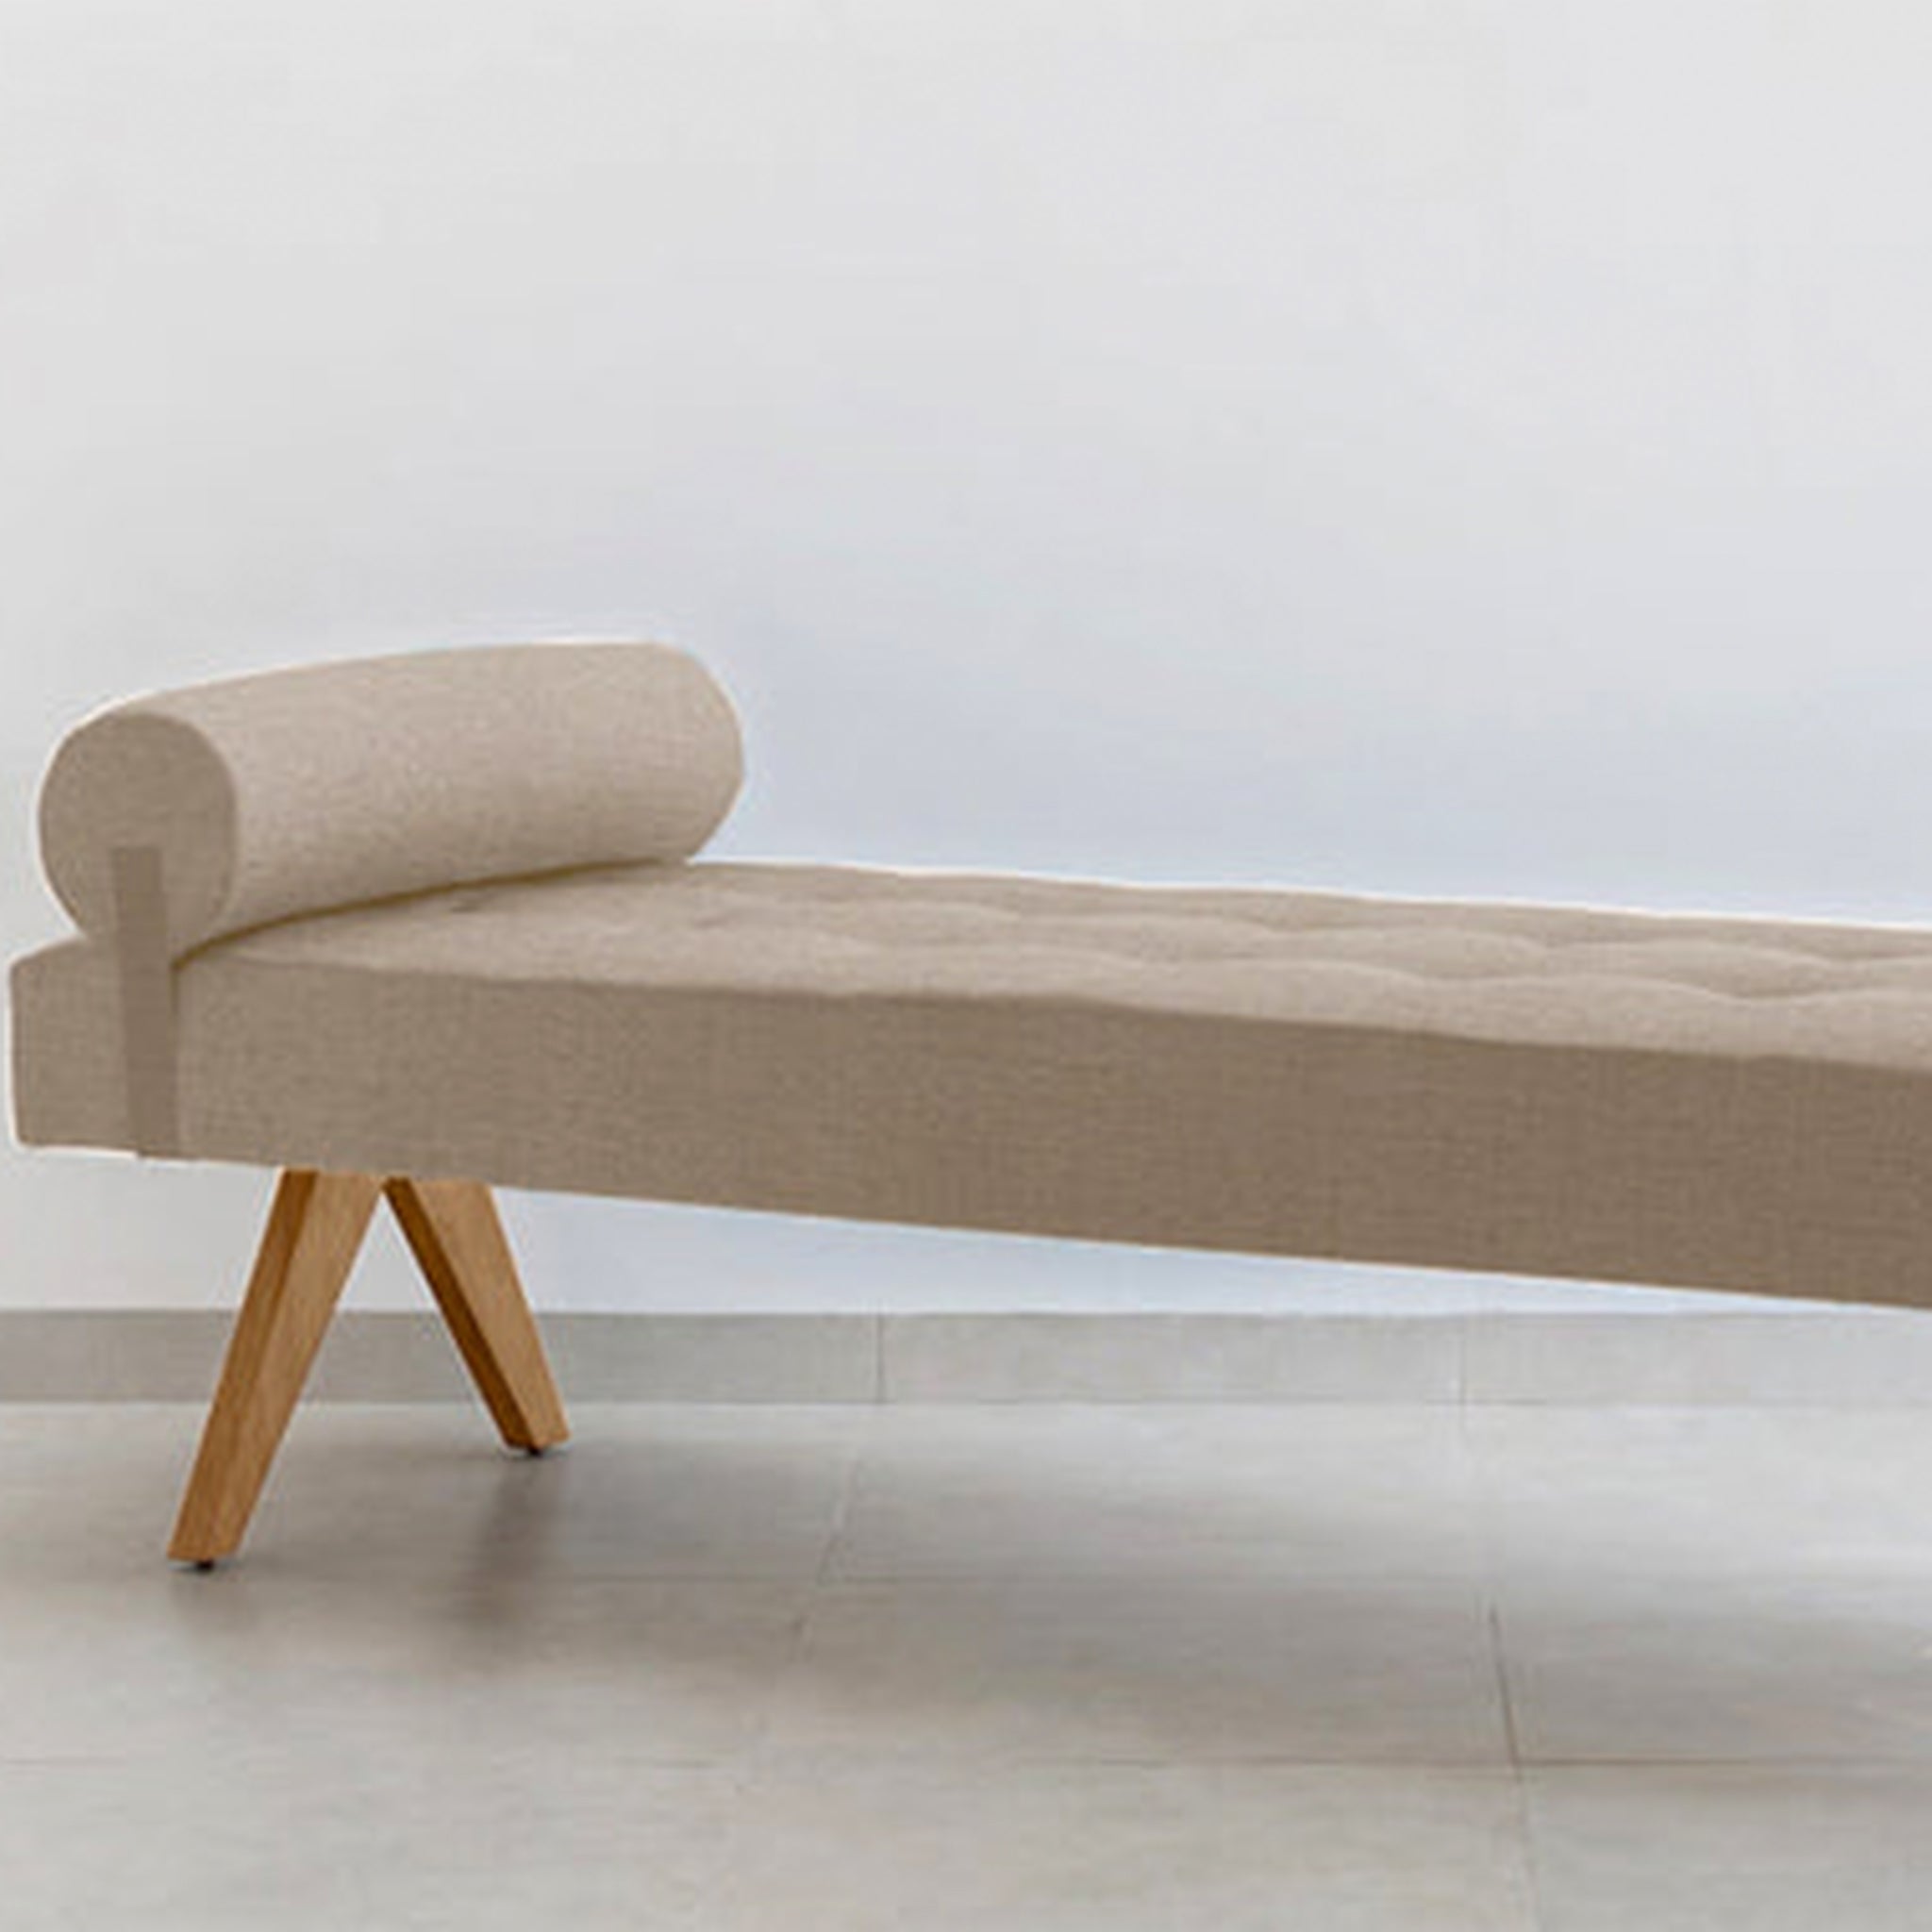 The Jack Daybed adding sophistication to any space